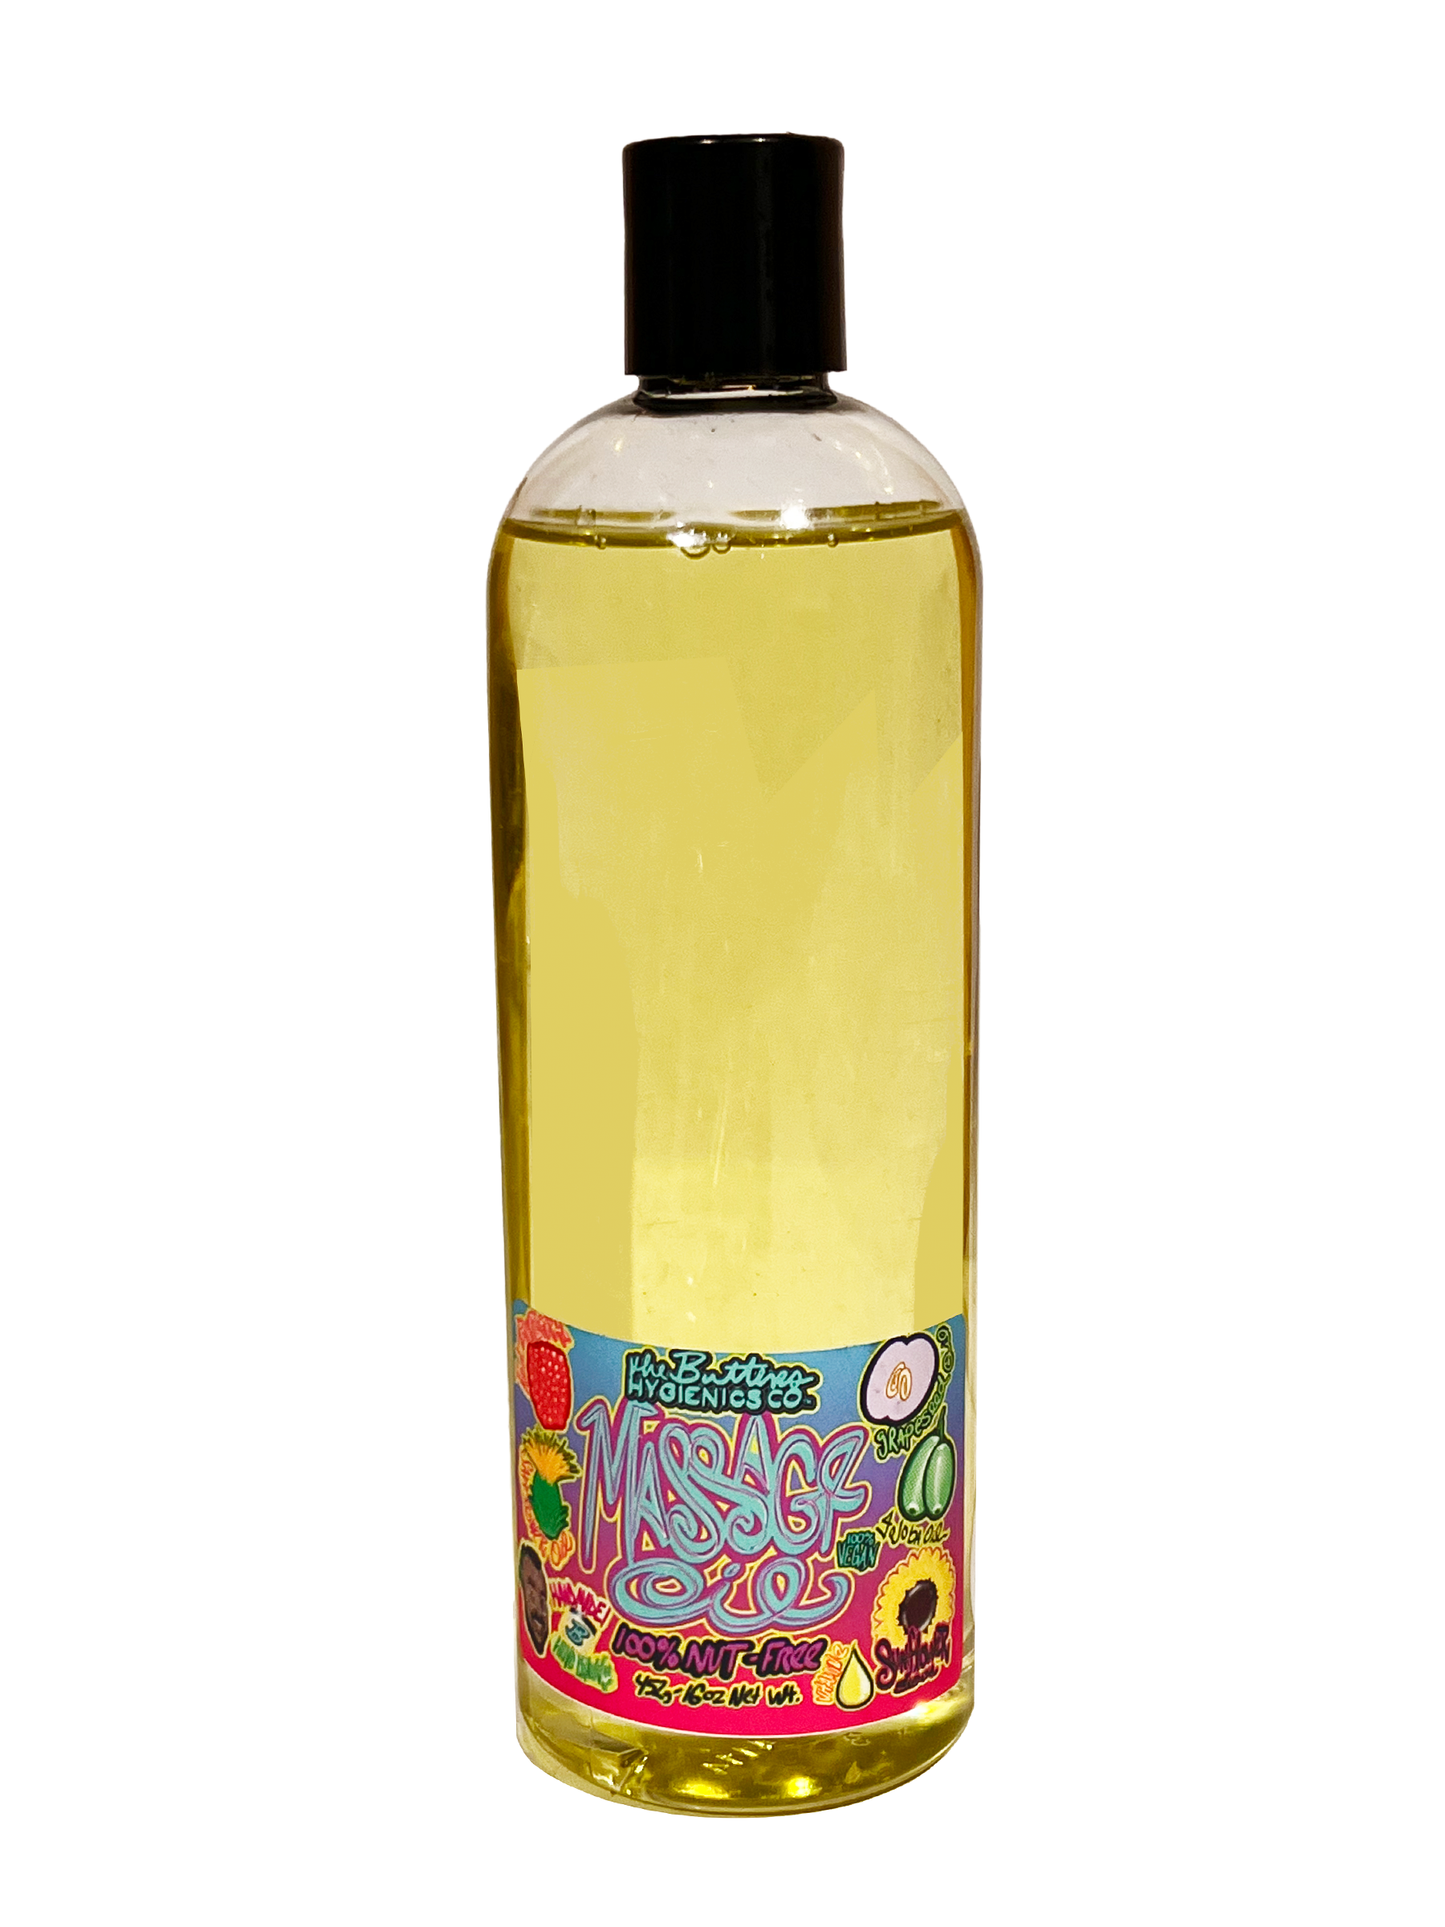 The Butters Massage Oil 16oz